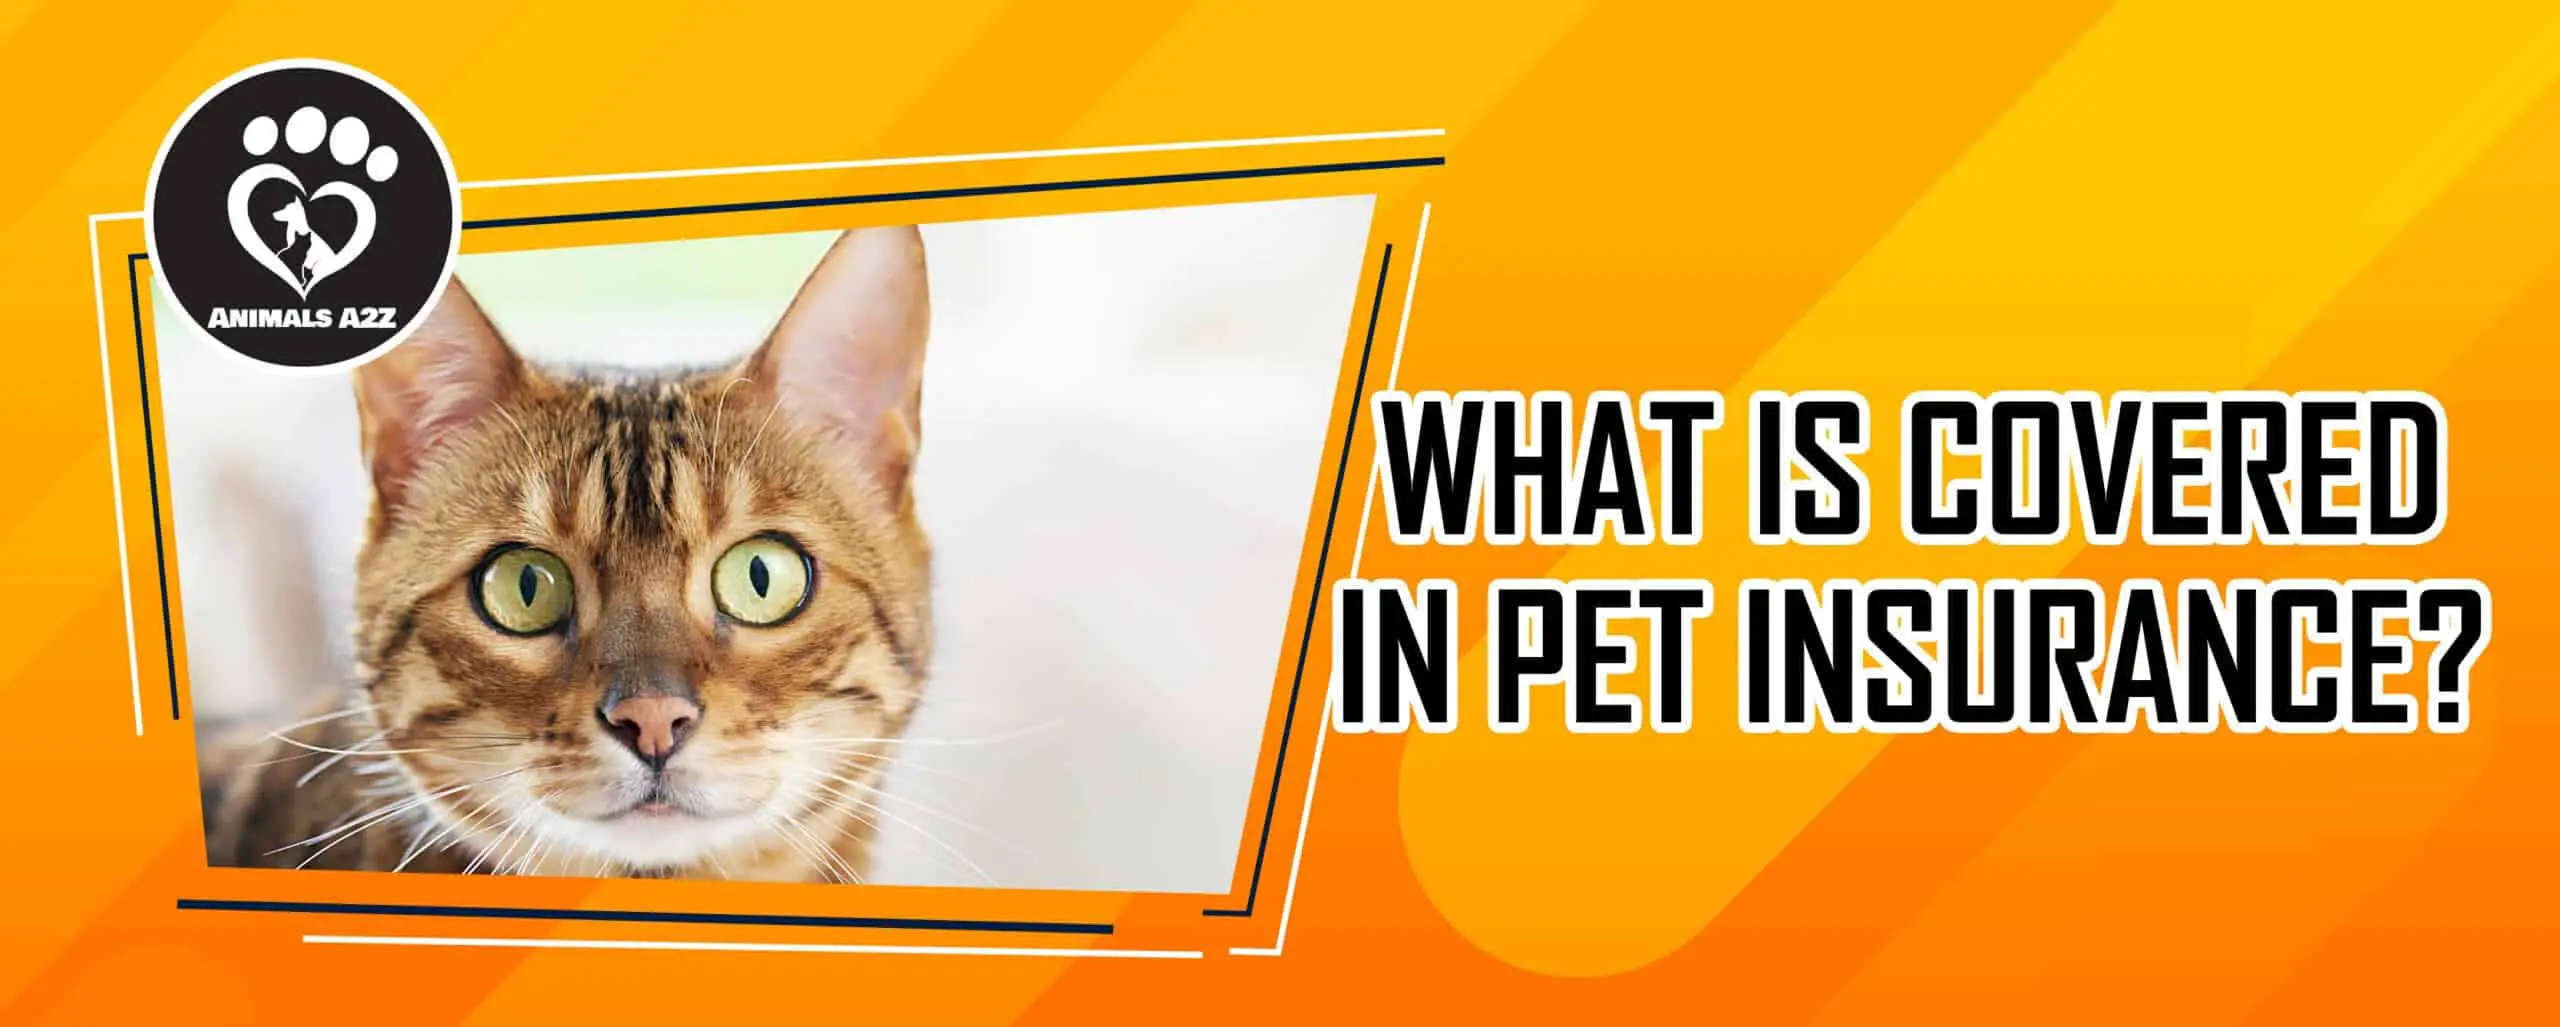 What is covered in pet insurance?